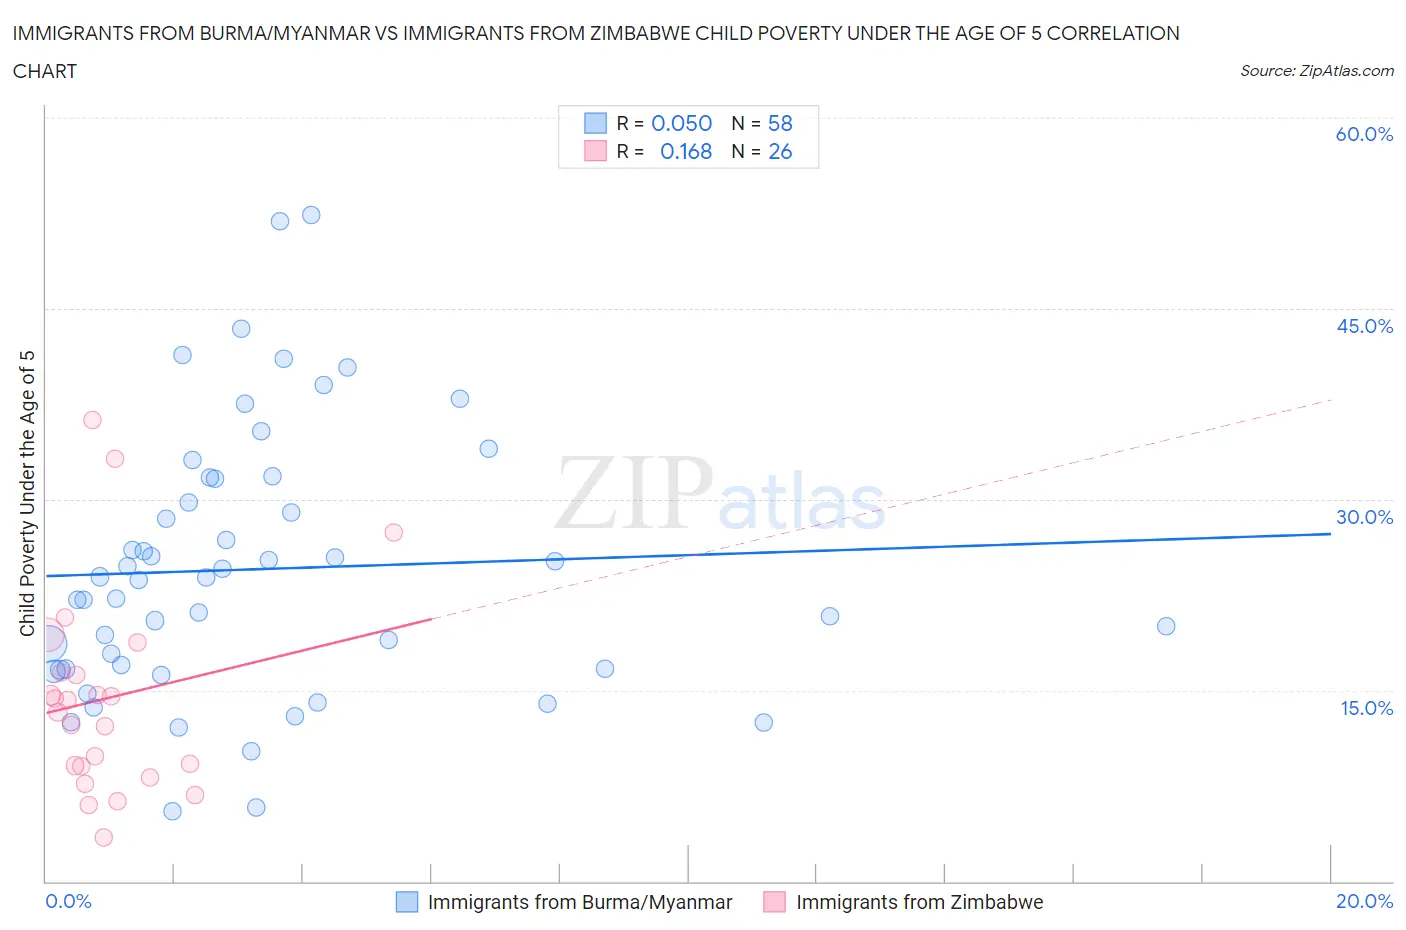 Immigrants from Burma/Myanmar vs Immigrants from Zimbabwe Child Poverty Under the Age of 5